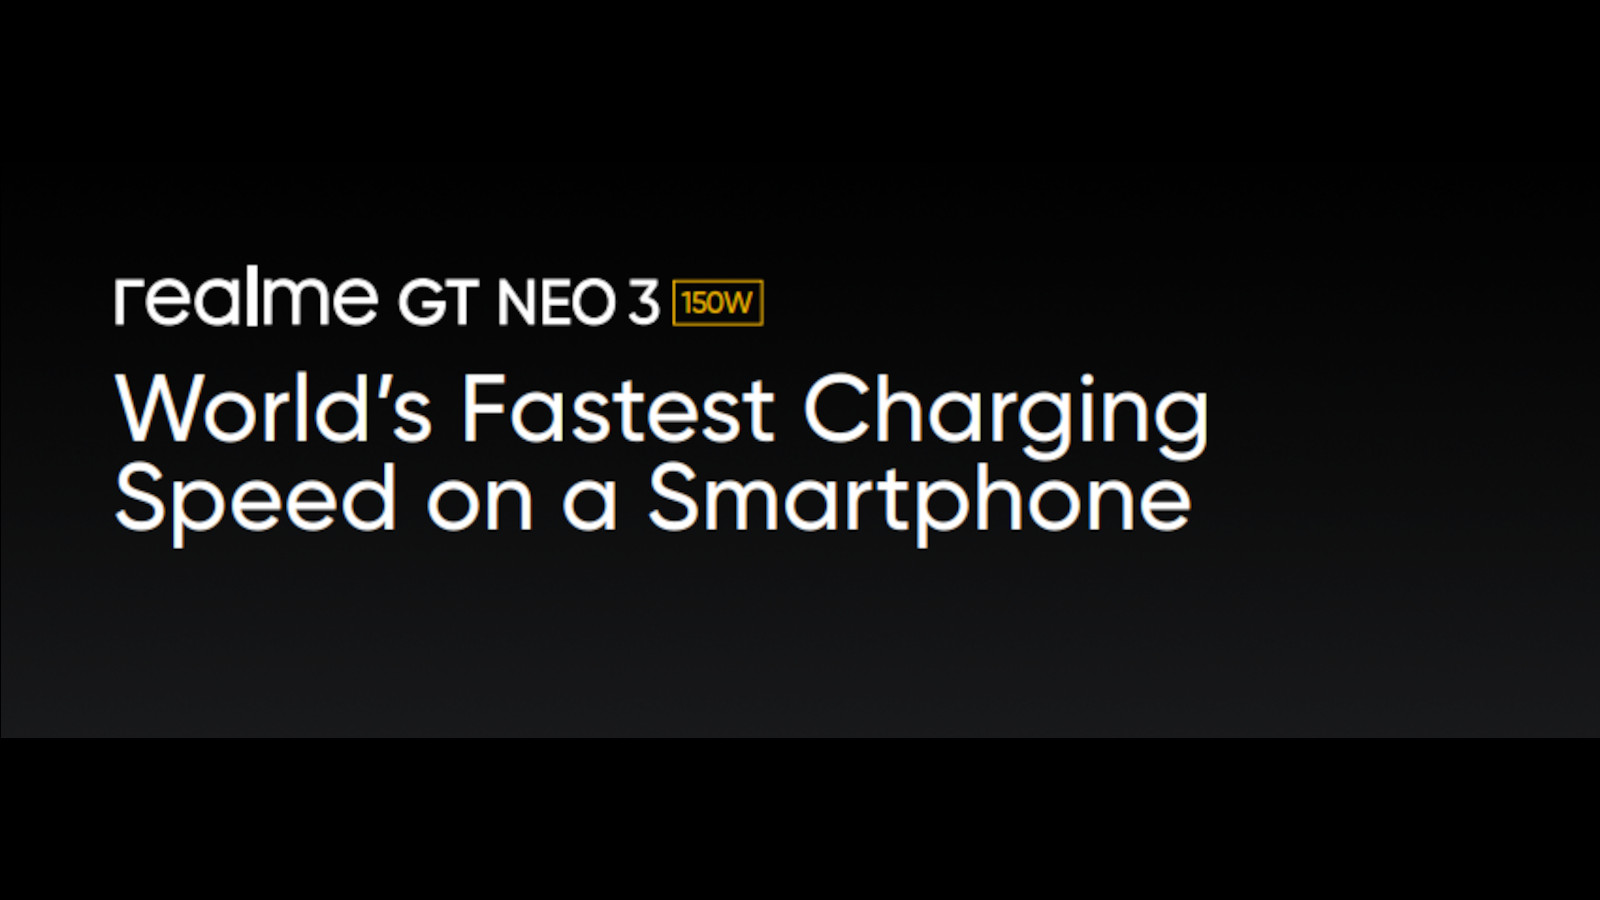 A graphic advertising Realme's 150W charging feature for the GT NEO 3